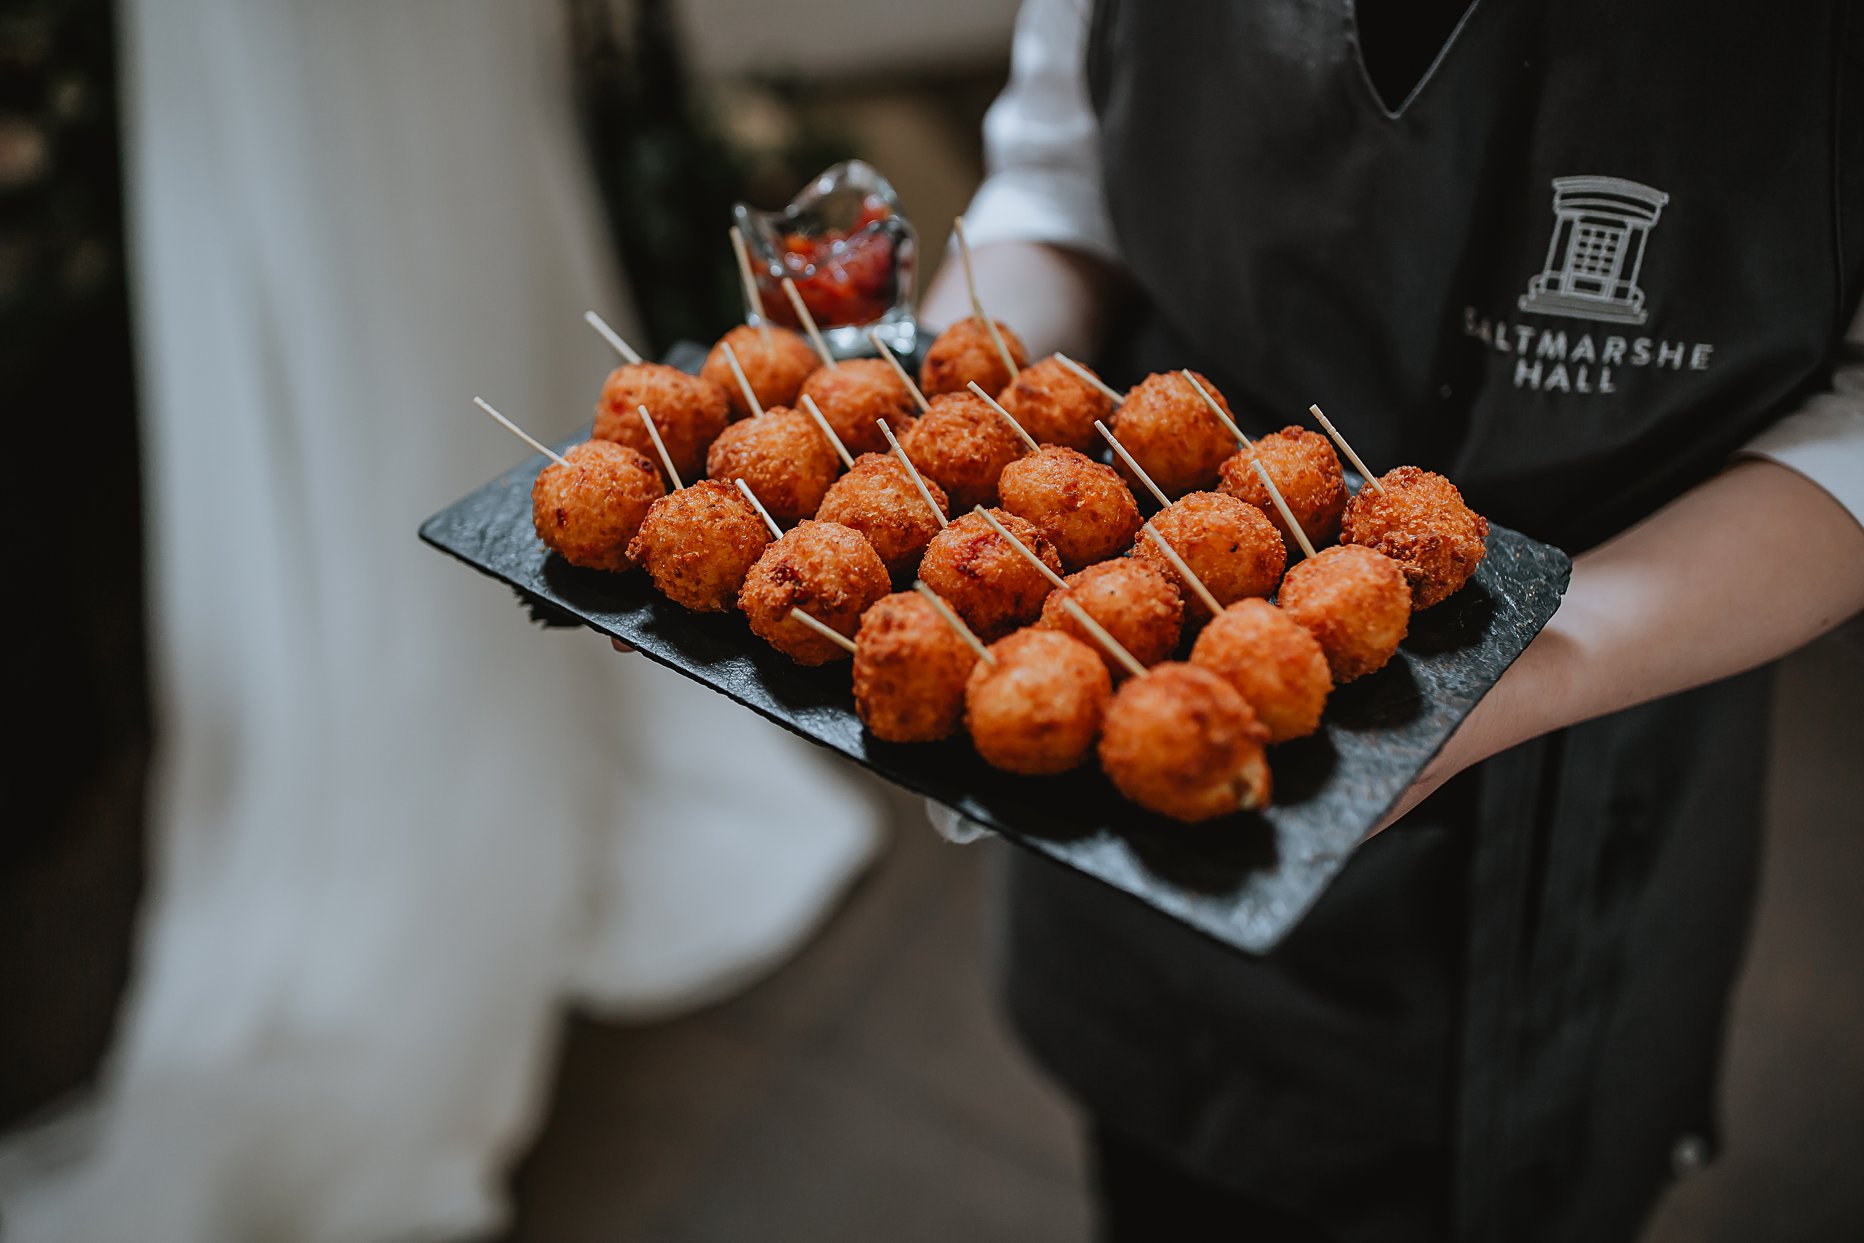 Wedding canapes being served at Saltmarshe Hall. Canapes look like arancini balls and are laid on a black slate board.